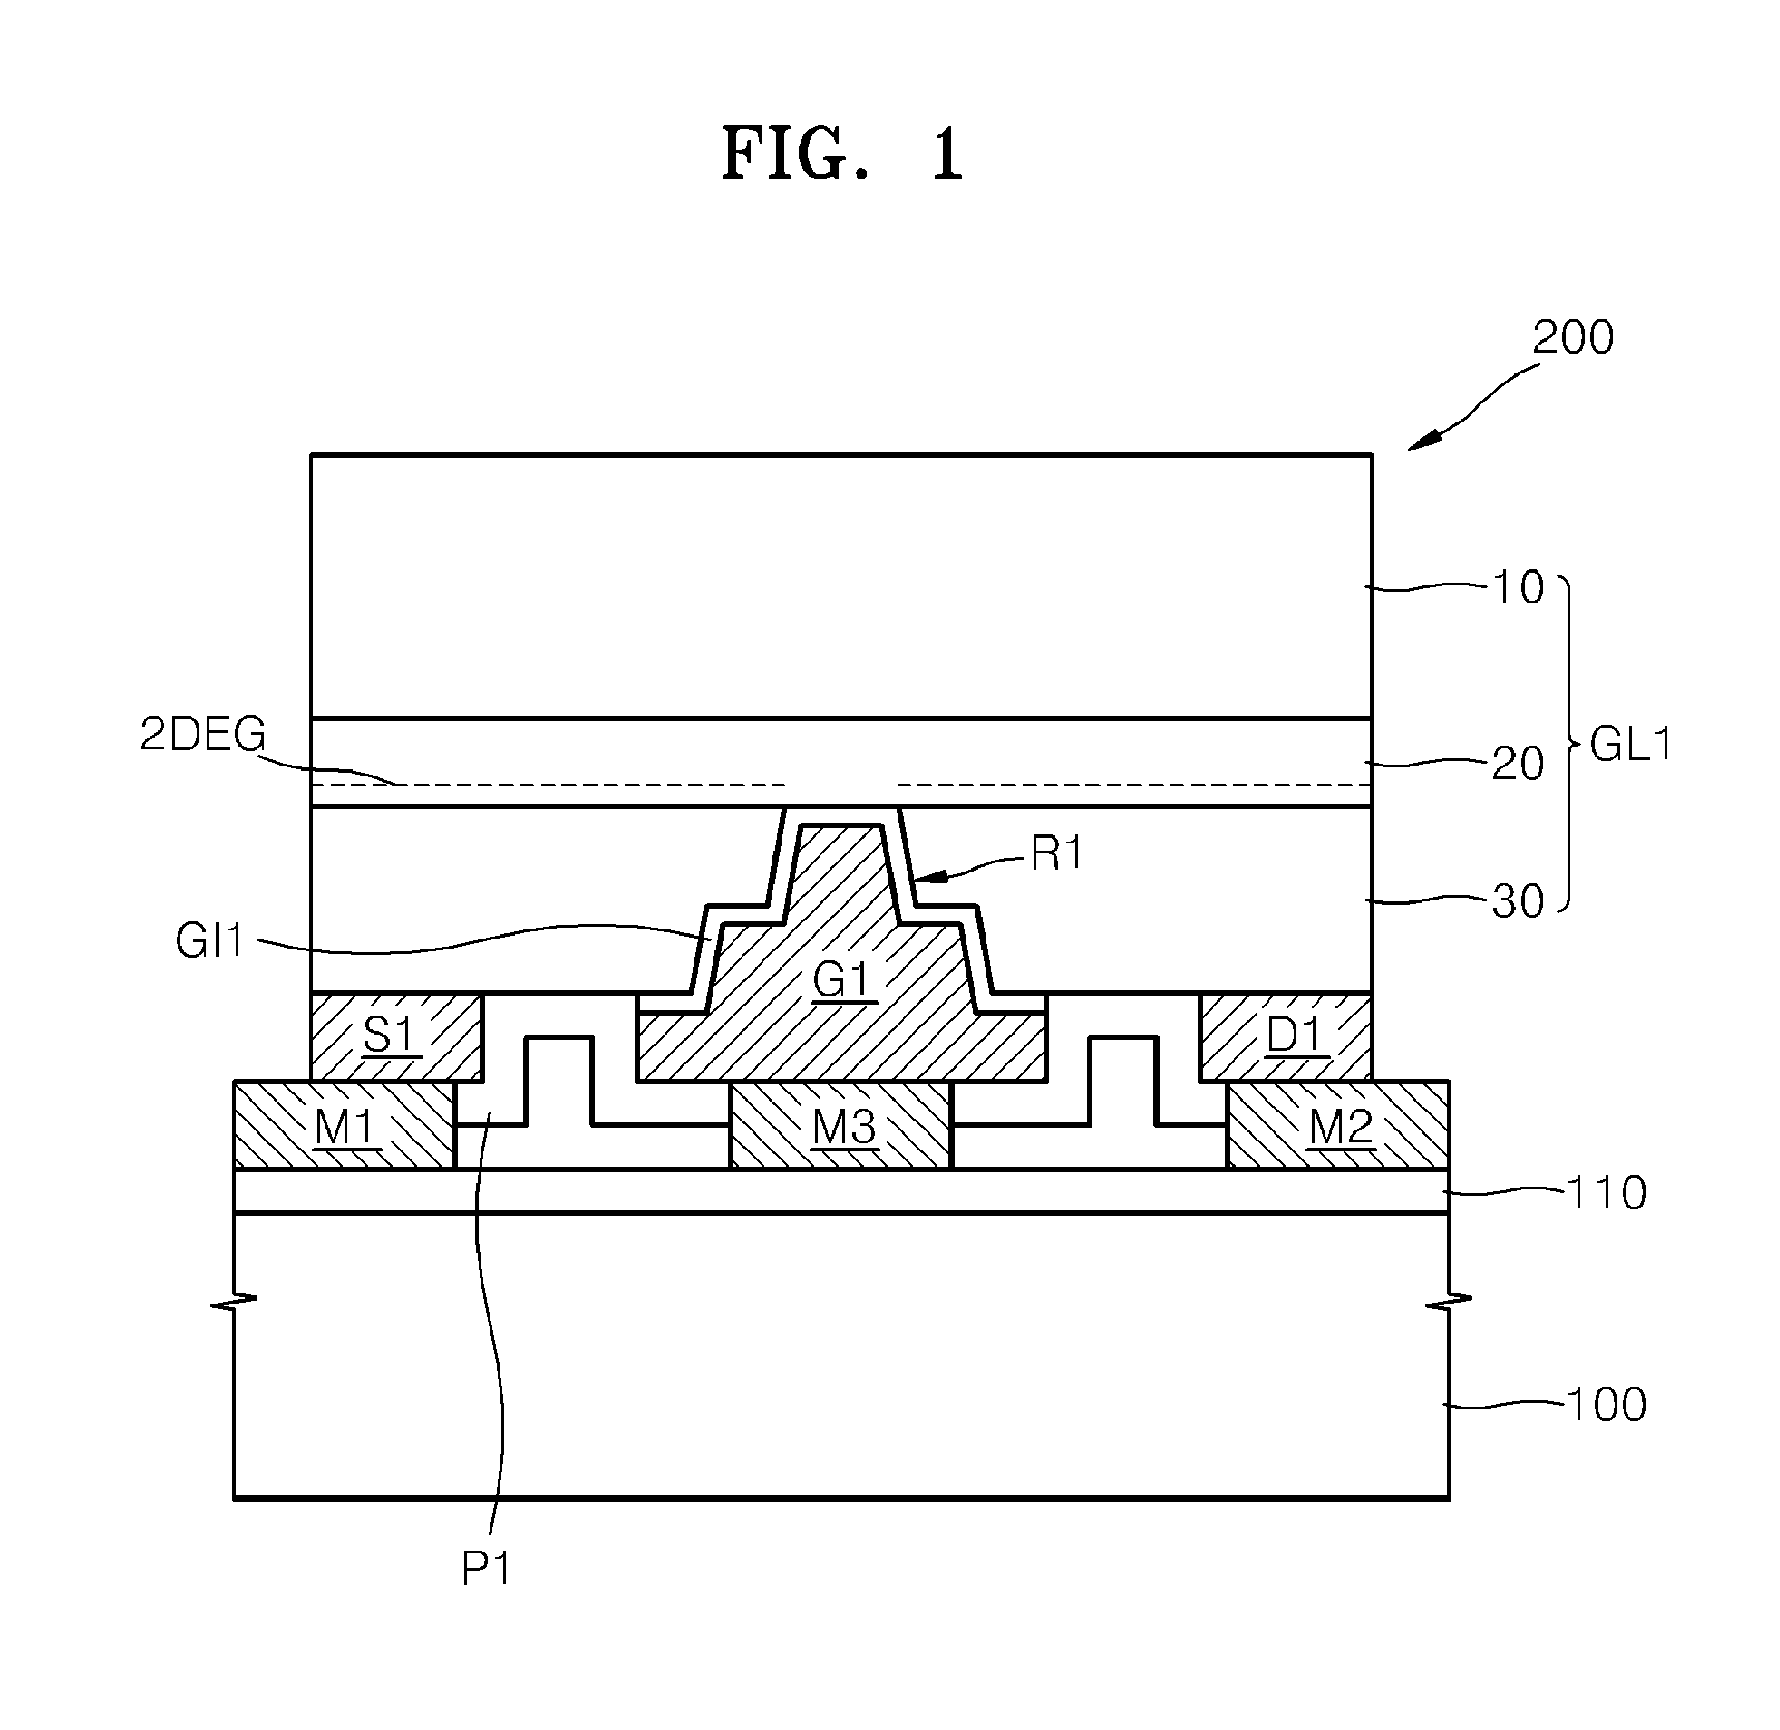 Methods of manufacturing the gallium nitride based semiconductor devices